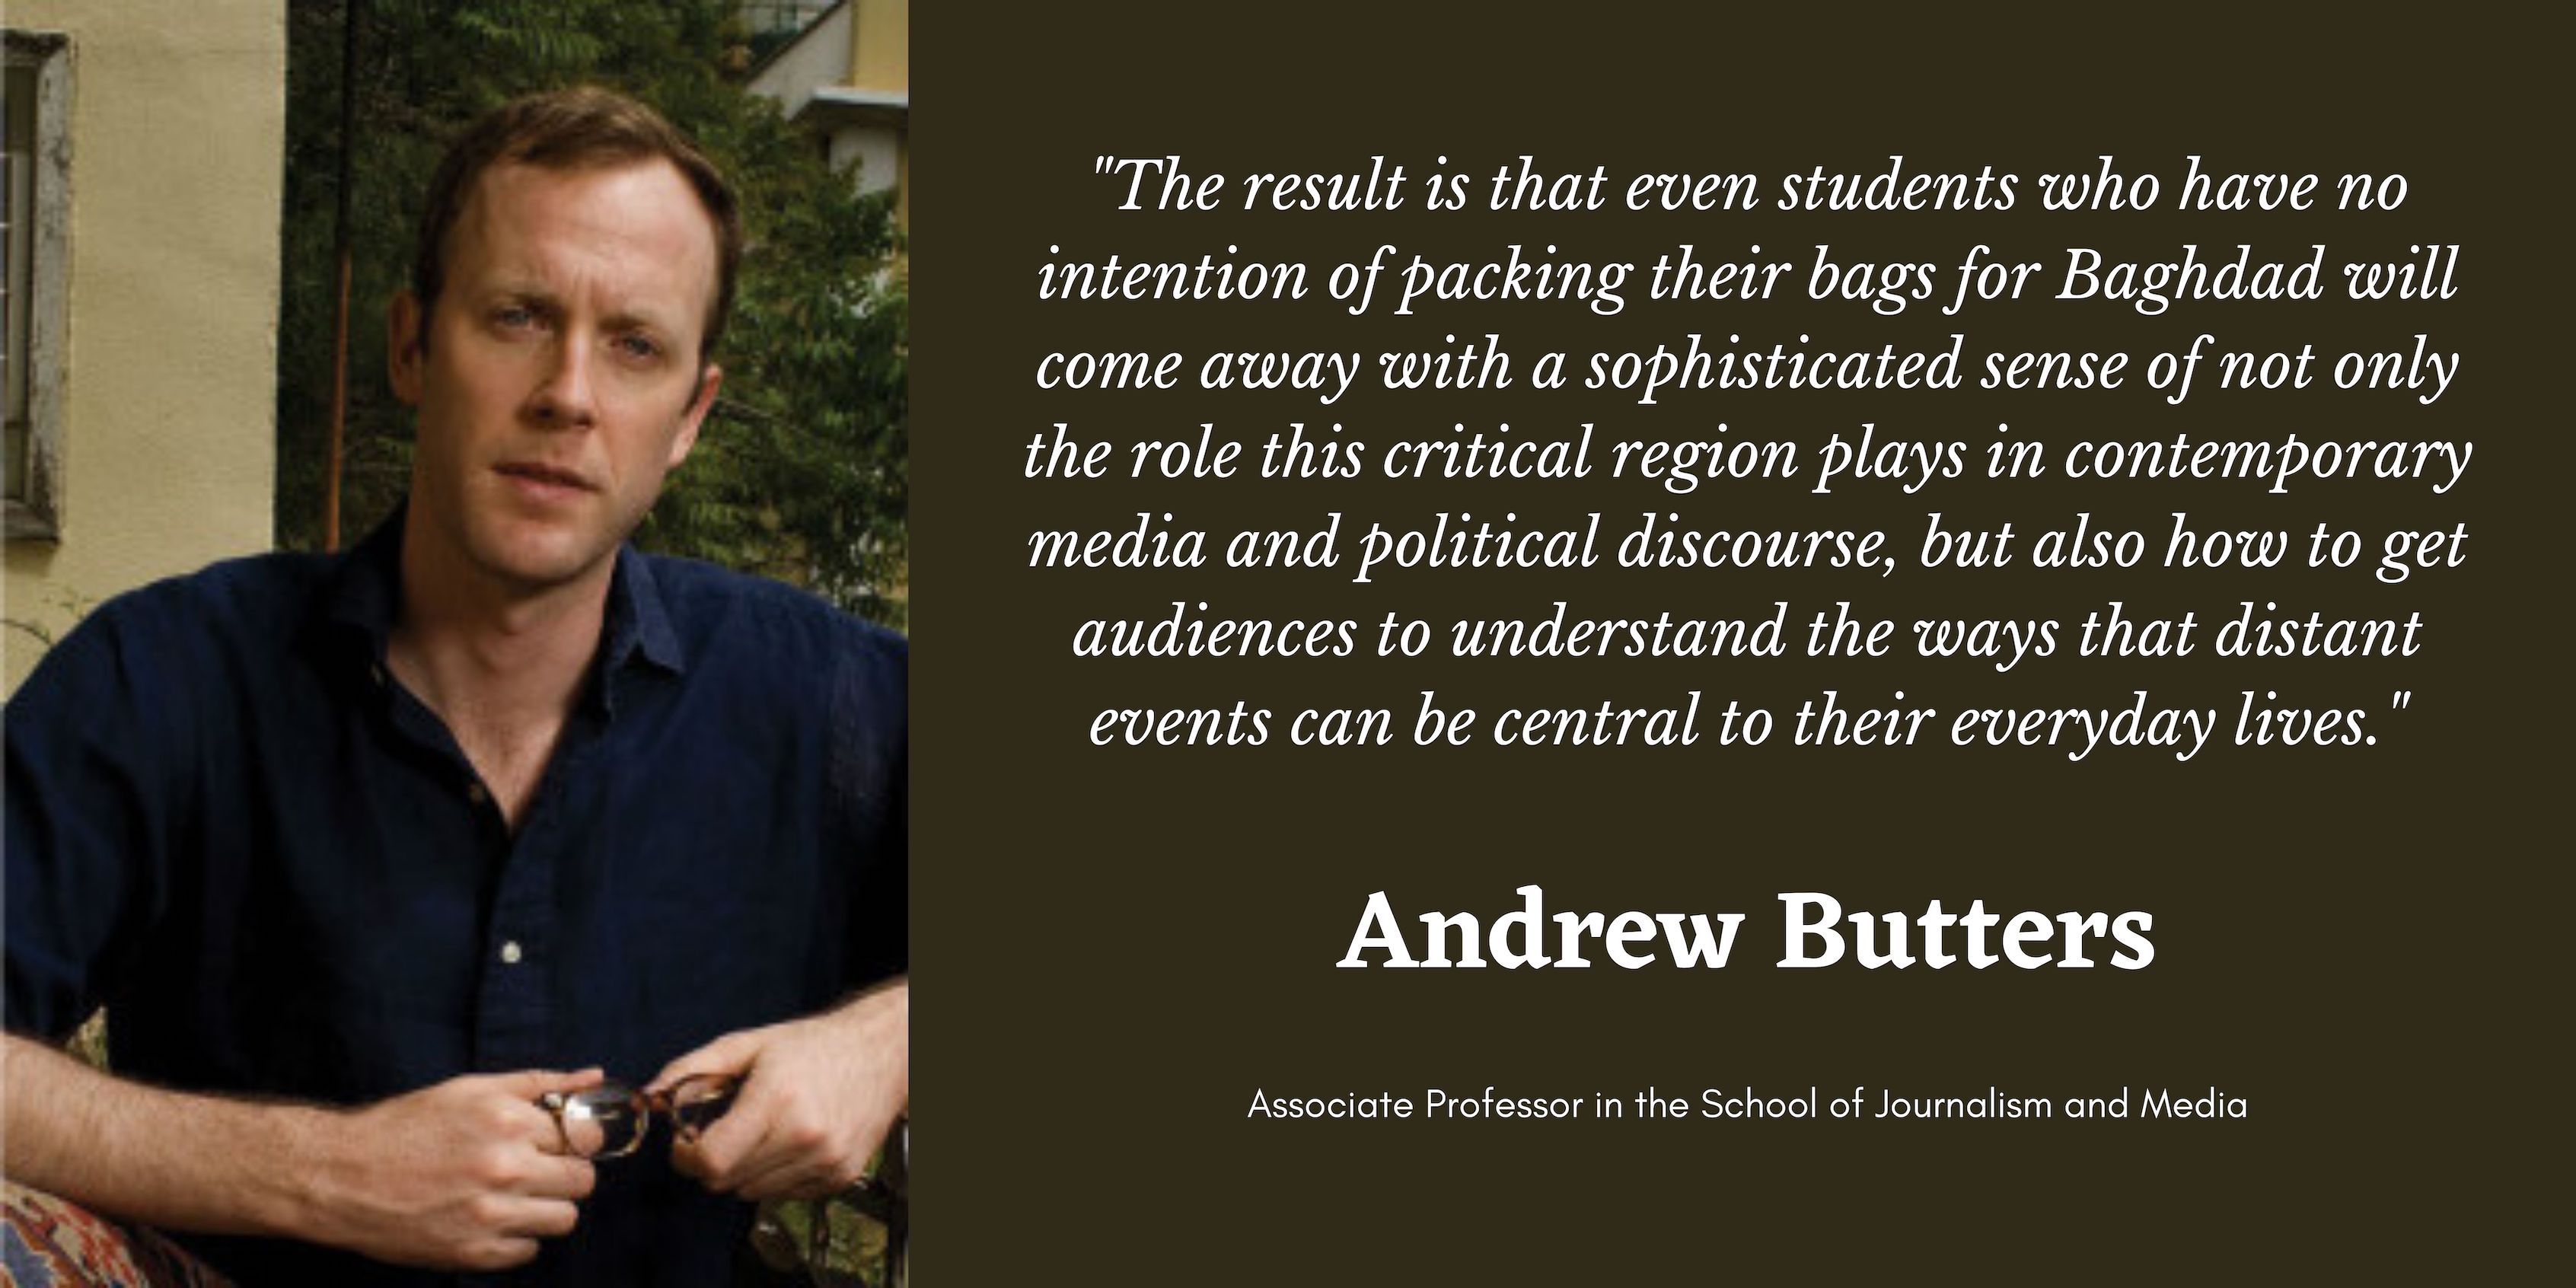 On the left is a photo of Professor Andrew Butters. On the right in white text is a quote that says, "The result is that even students who have no intention of packing their bags for Baghdad will come away with a sophisticated sense of not only the role this critical region plays in contemporary media and political discourse, but also how to get audiences to understand the ways that distant events can be central to their everyday lives." Below that is his name and position title.